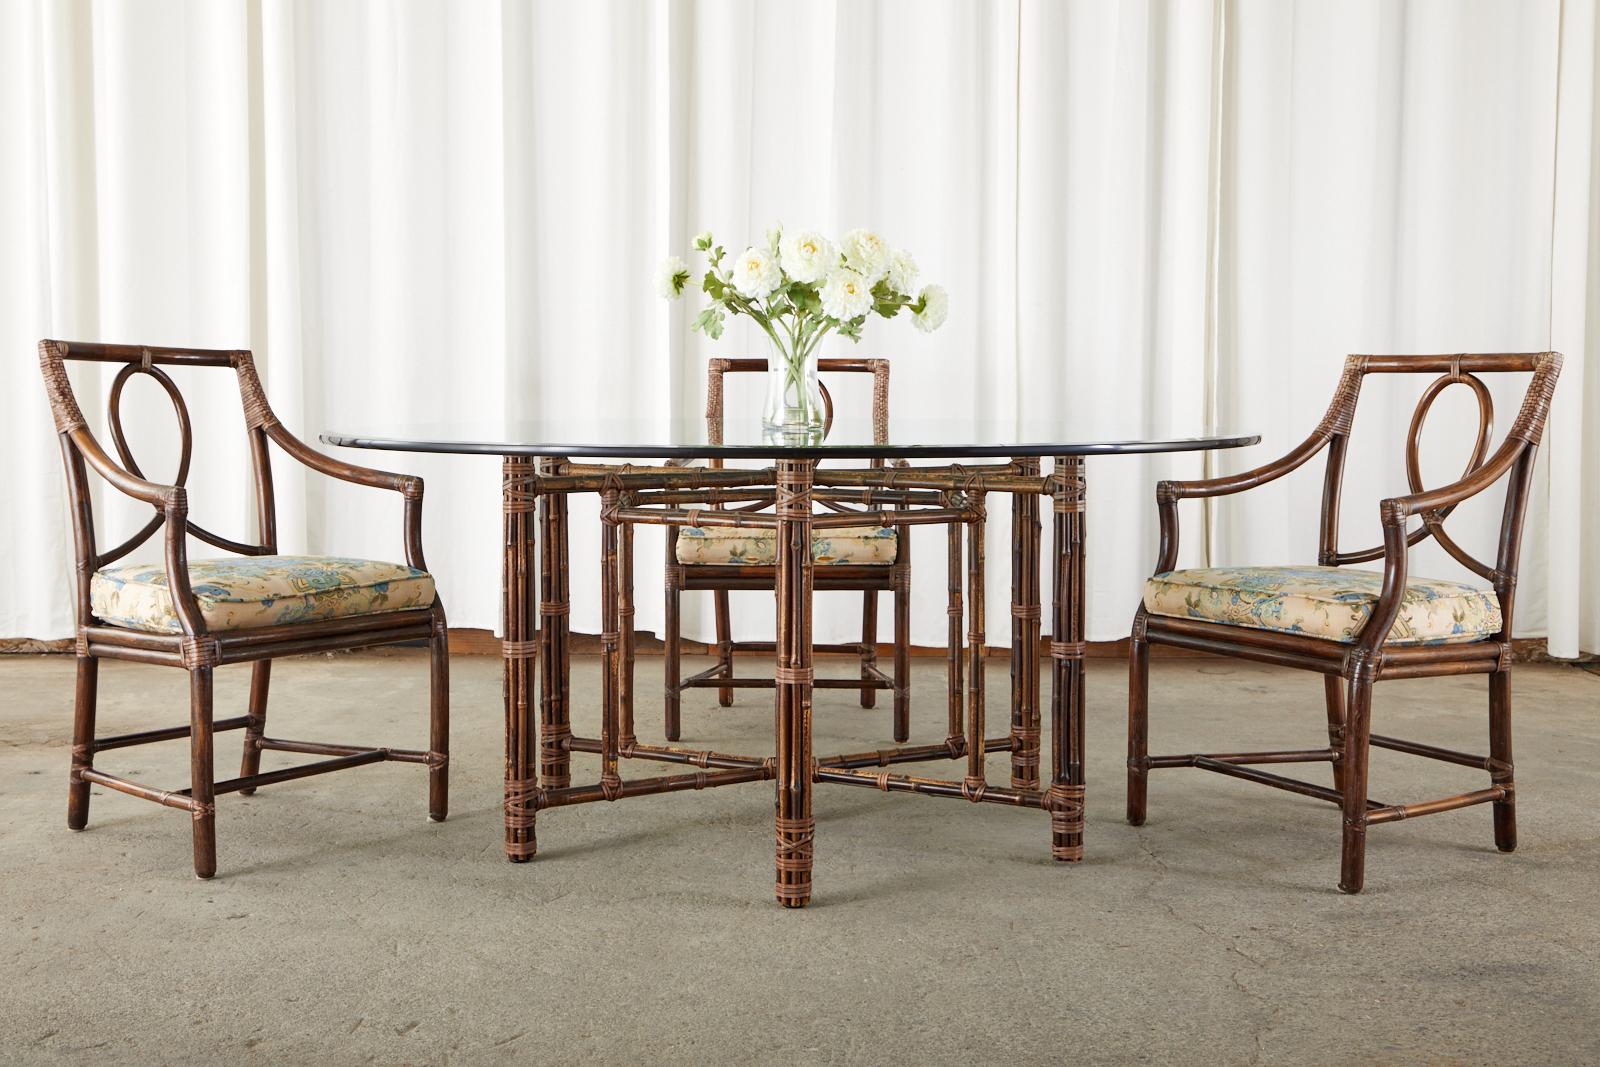 Graceful and elegant set of six loop back rattan dining chairs made in the California organic modern style by McGuire. One of their most iconic and beautiful chair designs featuring a sinuous loop back splat with a square seat back. The arms gently